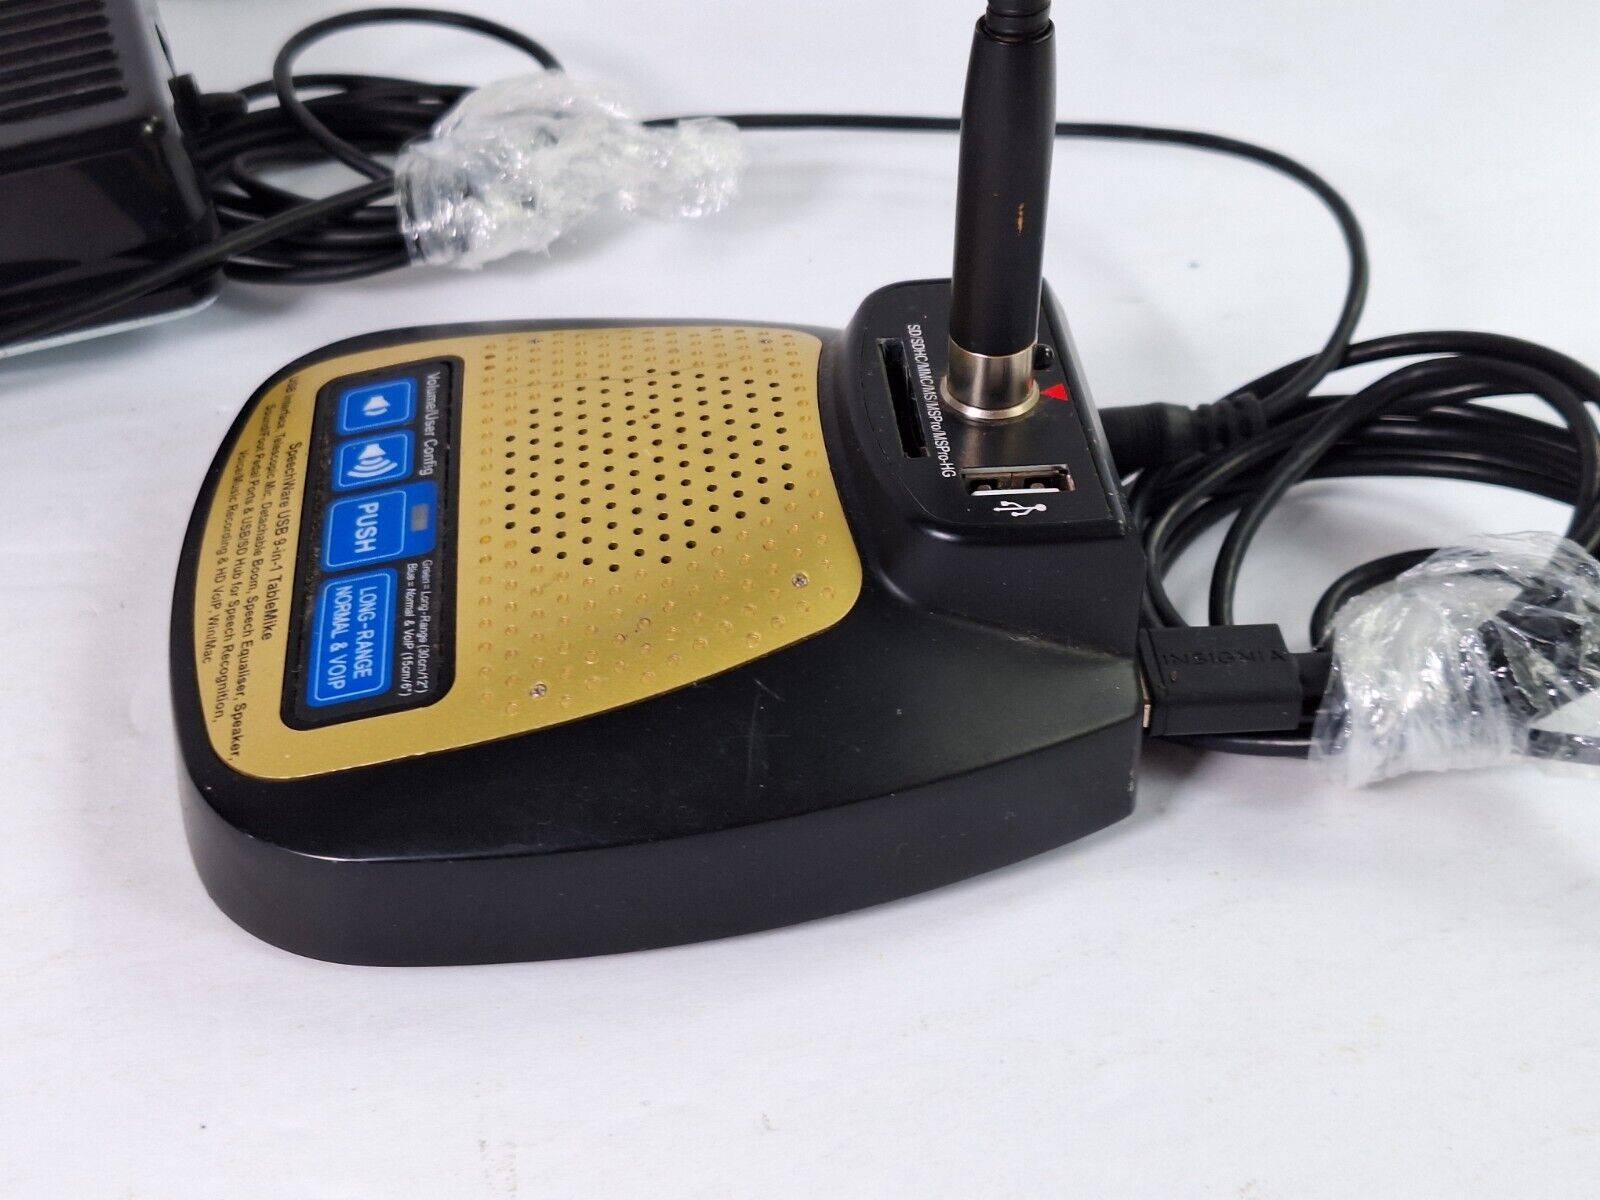 Speechware Usb 9 In 1 Tablemike Desktop Microphone Pedal Gold Speech Equilizer